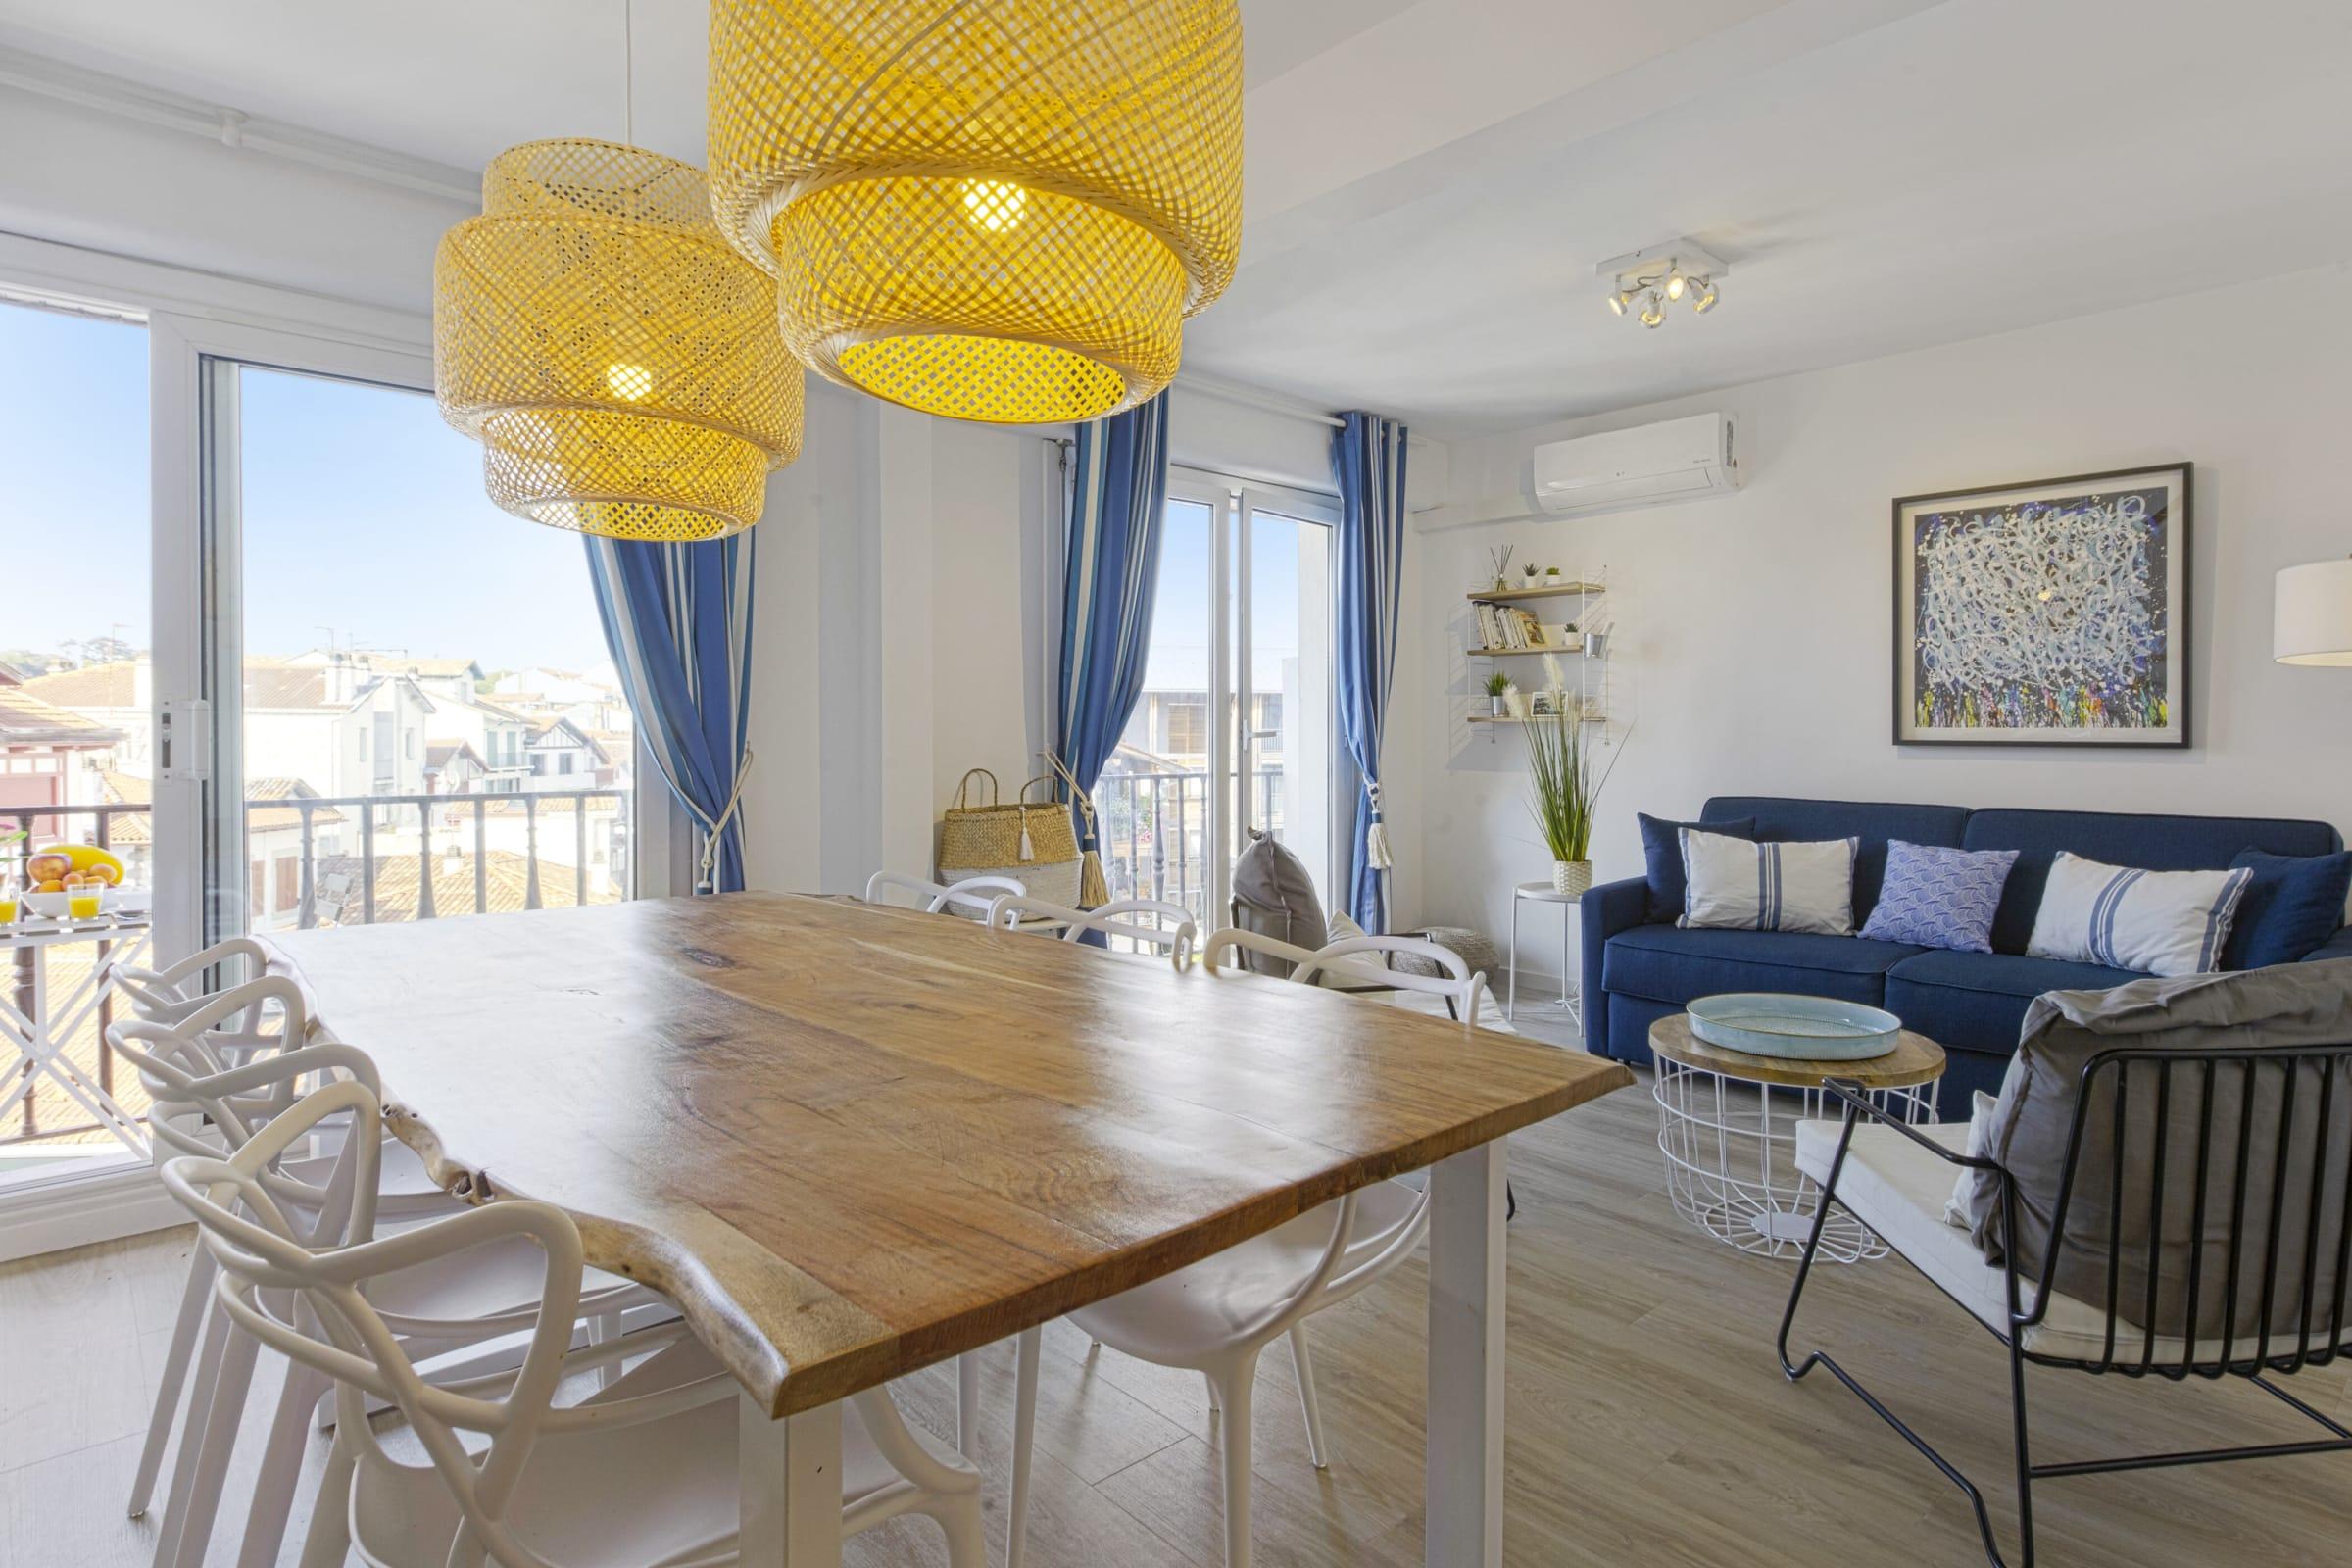 Property Image 1 - Superb flat with balcony in the heart of Saint-Jean-de-Luz